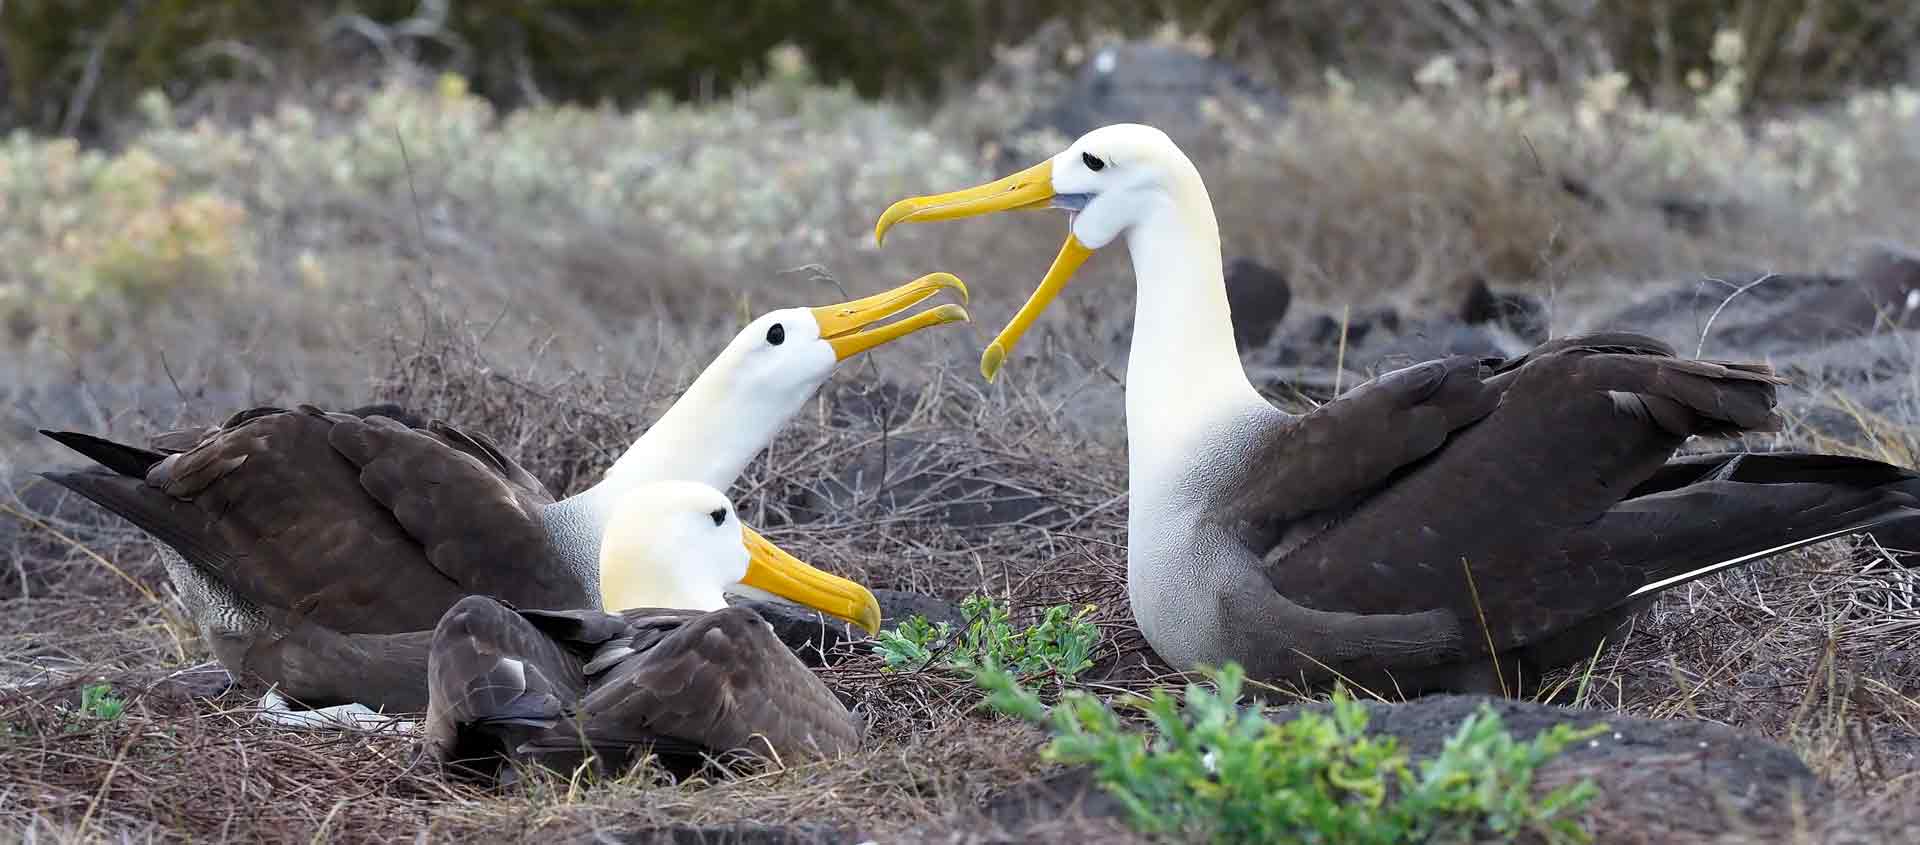 Galapagos Islands and Mashpi Reserve photo of Waved Albatross